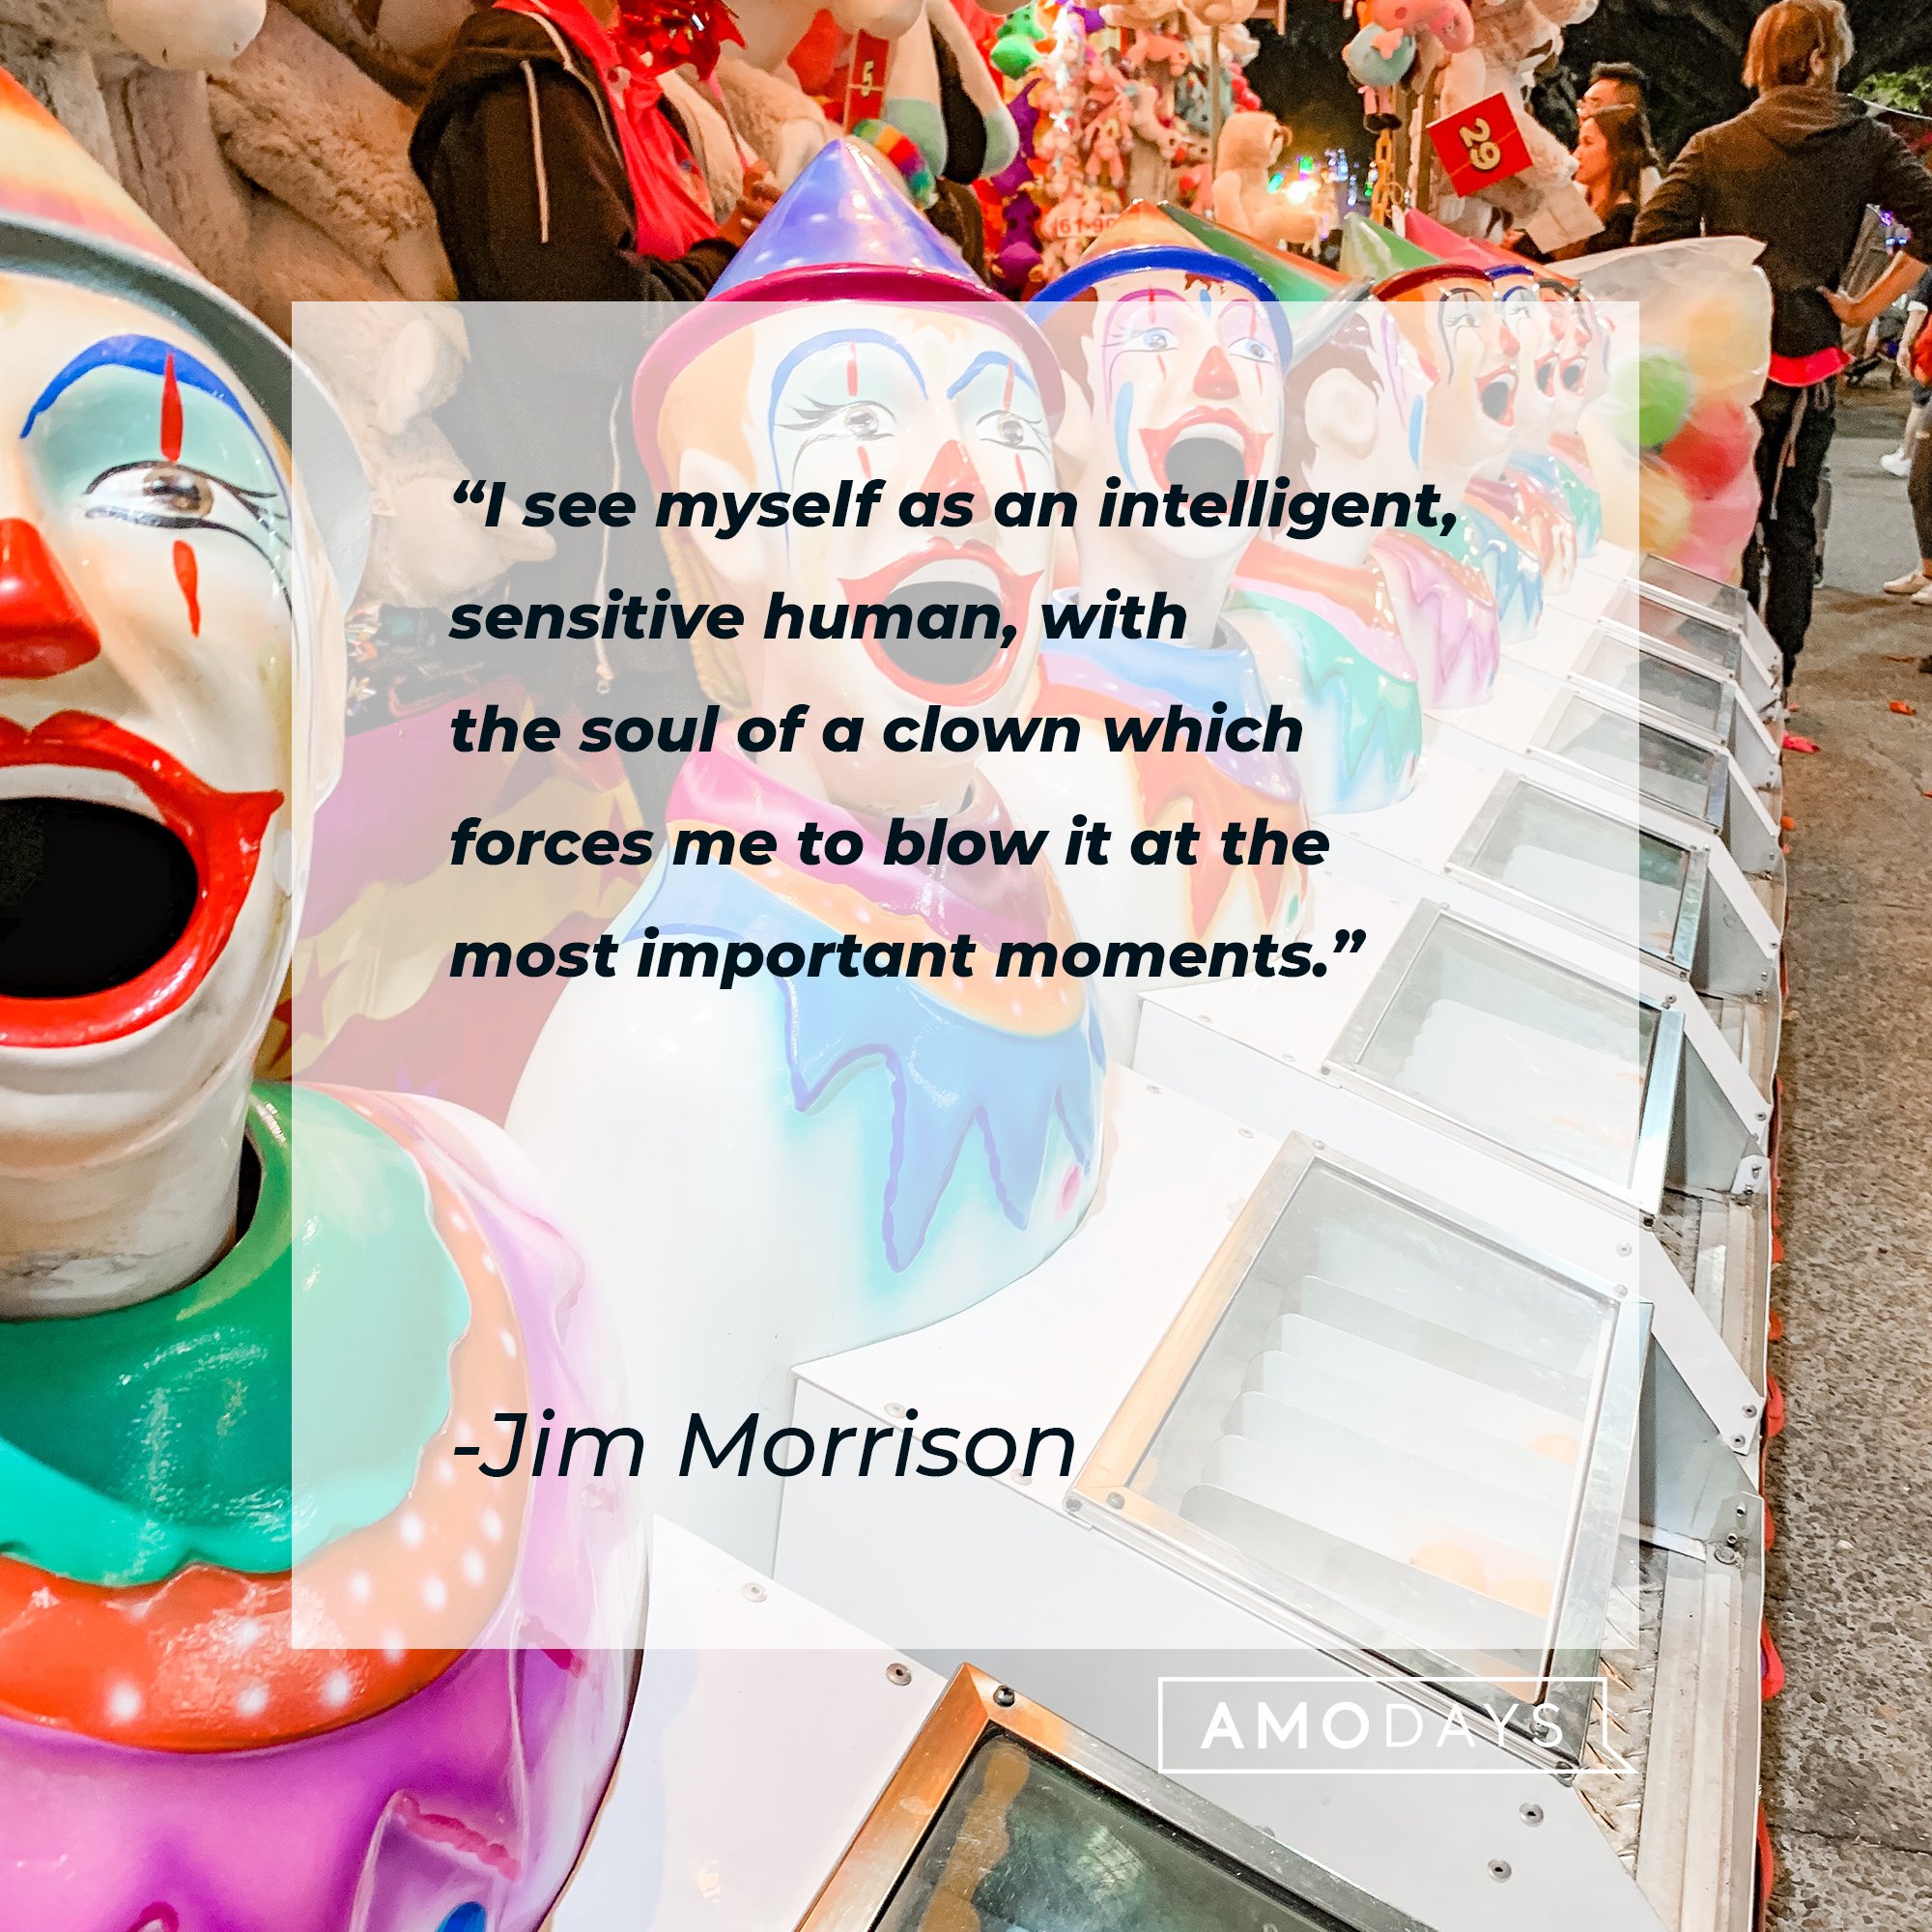 Jim Morrison's quote "I see myself as an intelligent, sensitive human, with the soul of a clown which forces me to blow it at the most important moments." | Source: Unsplash.com